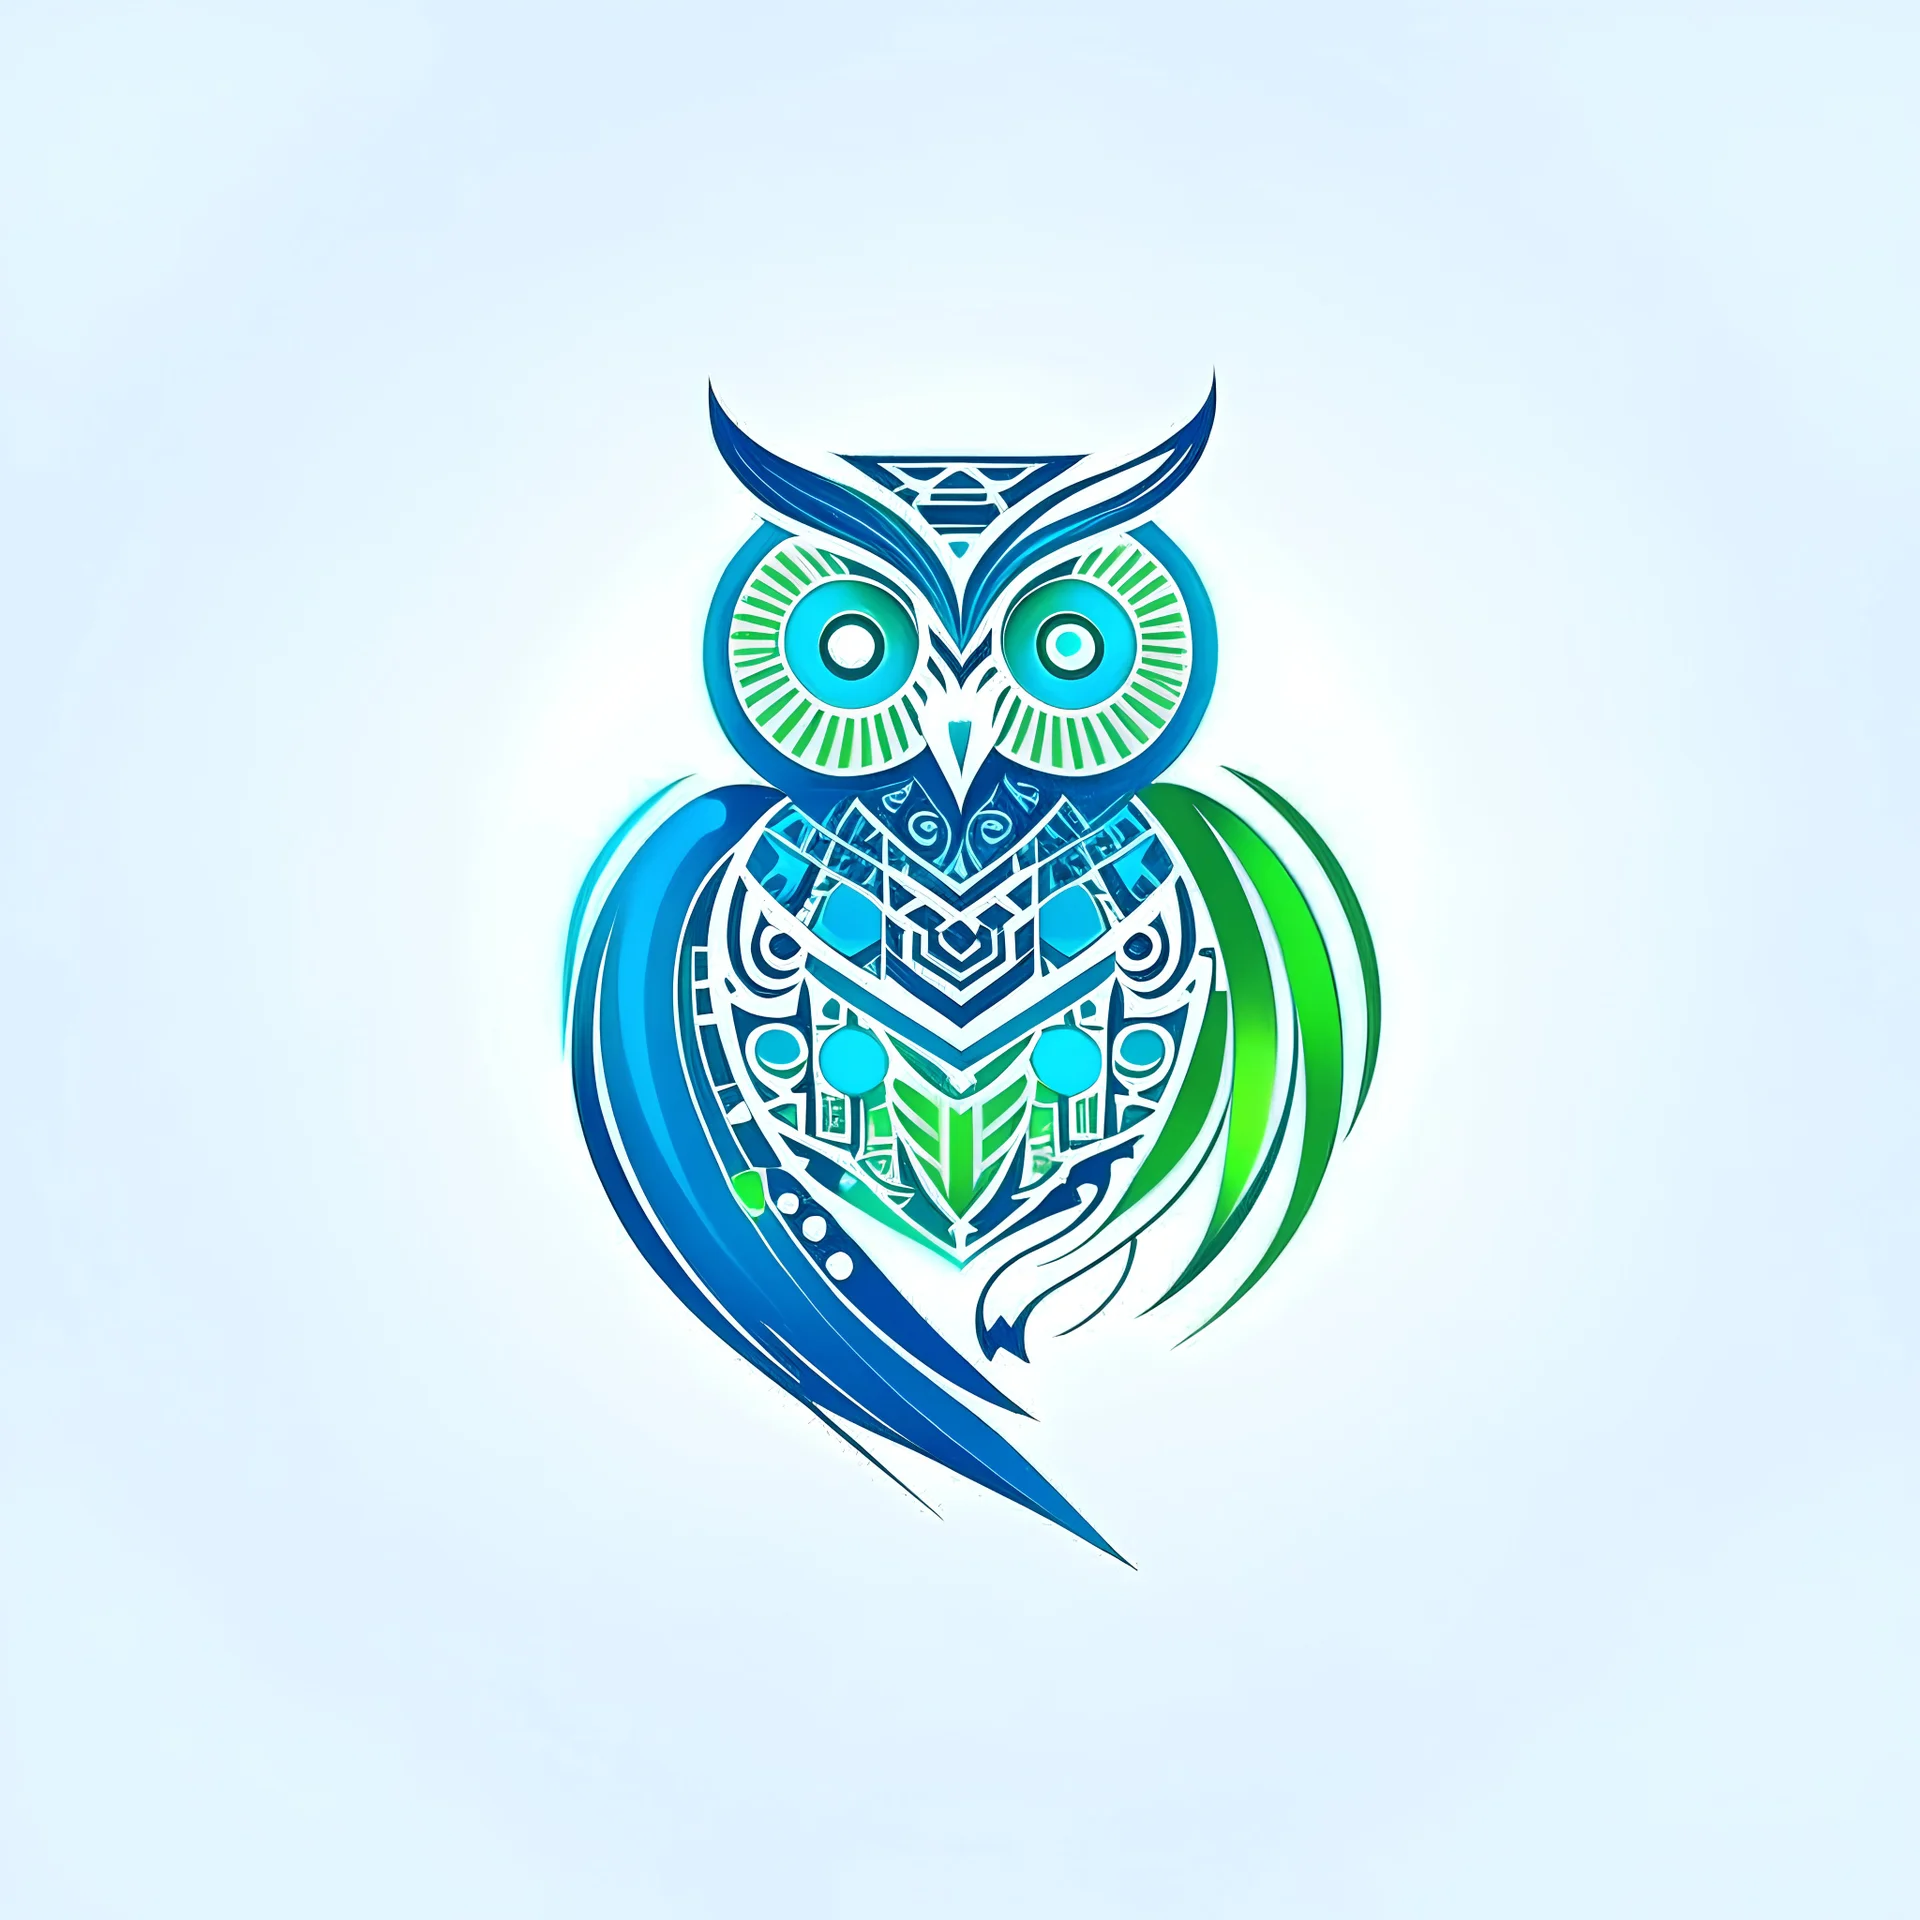 Design a logo that combines an owl and a circuit pattern or data stream, symbolizing a fusion of wisdom and advanced technology, ensuring a clean and modern aesthetic suitable for a tech company named "Whizdom.ai" using a color palette of [blue, green, white].